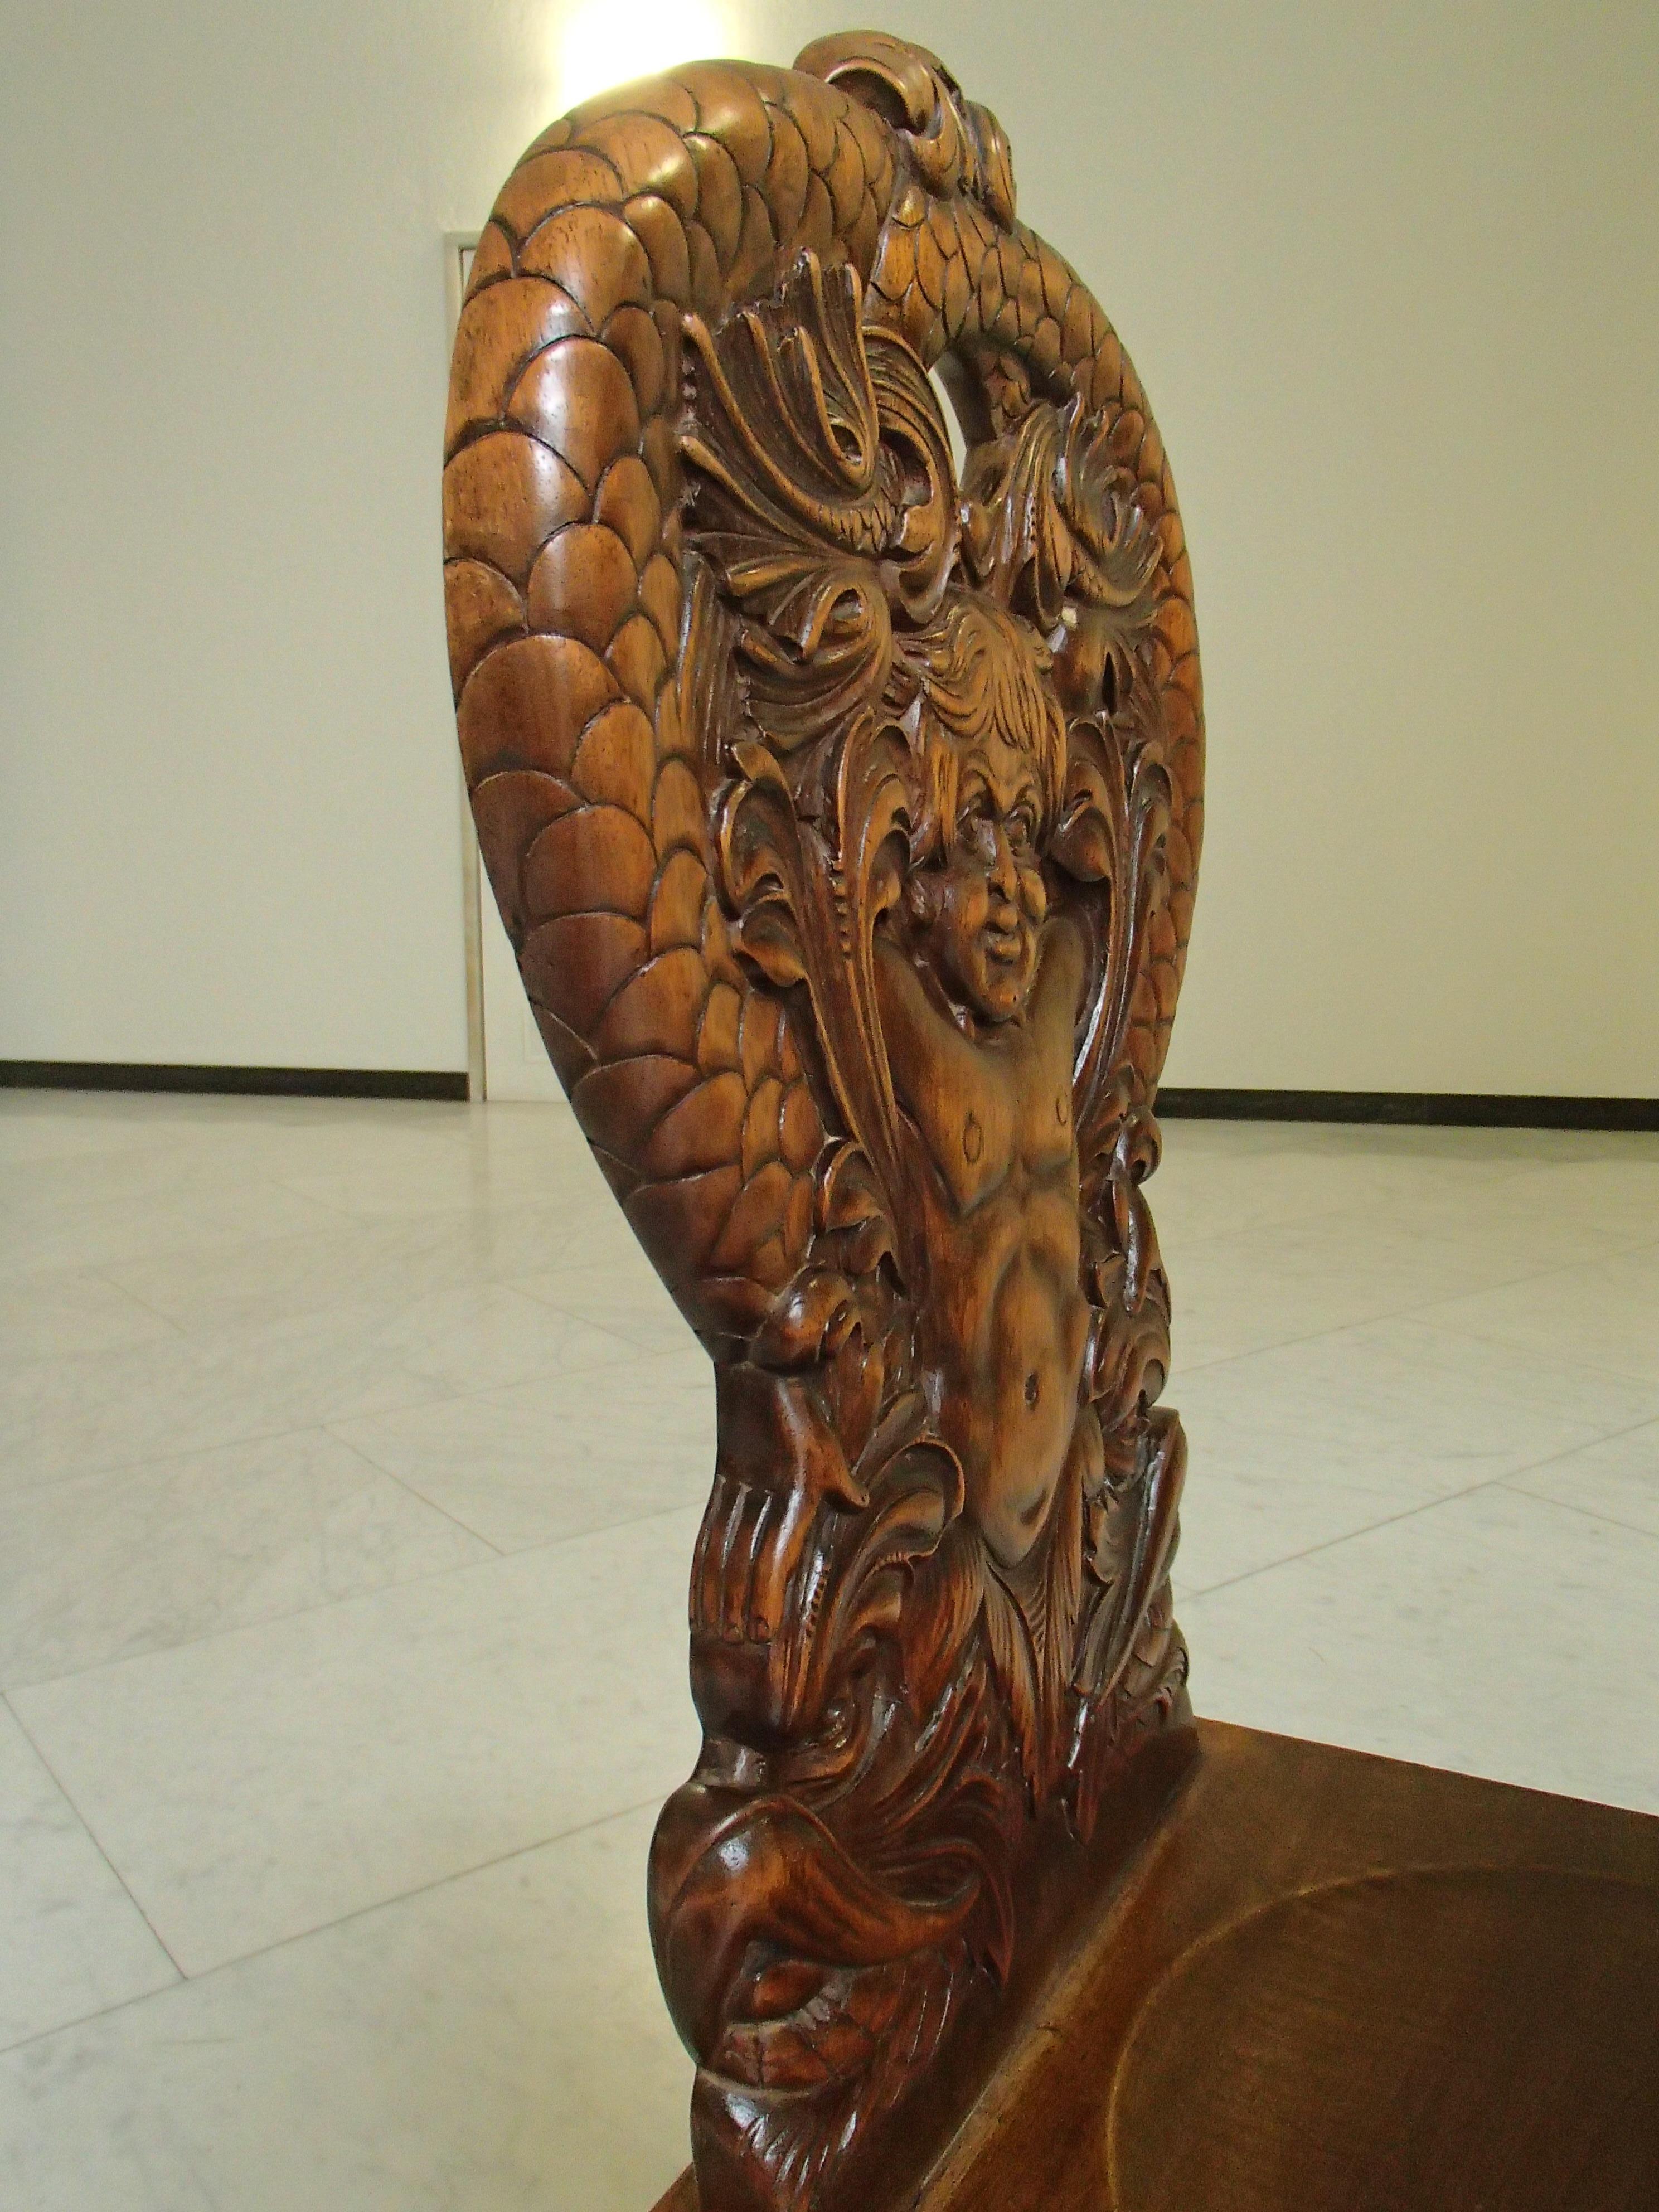 18th century Brutalist wooden chairs carved with fabulous creatures - dragons
totally 5 available see other announces.